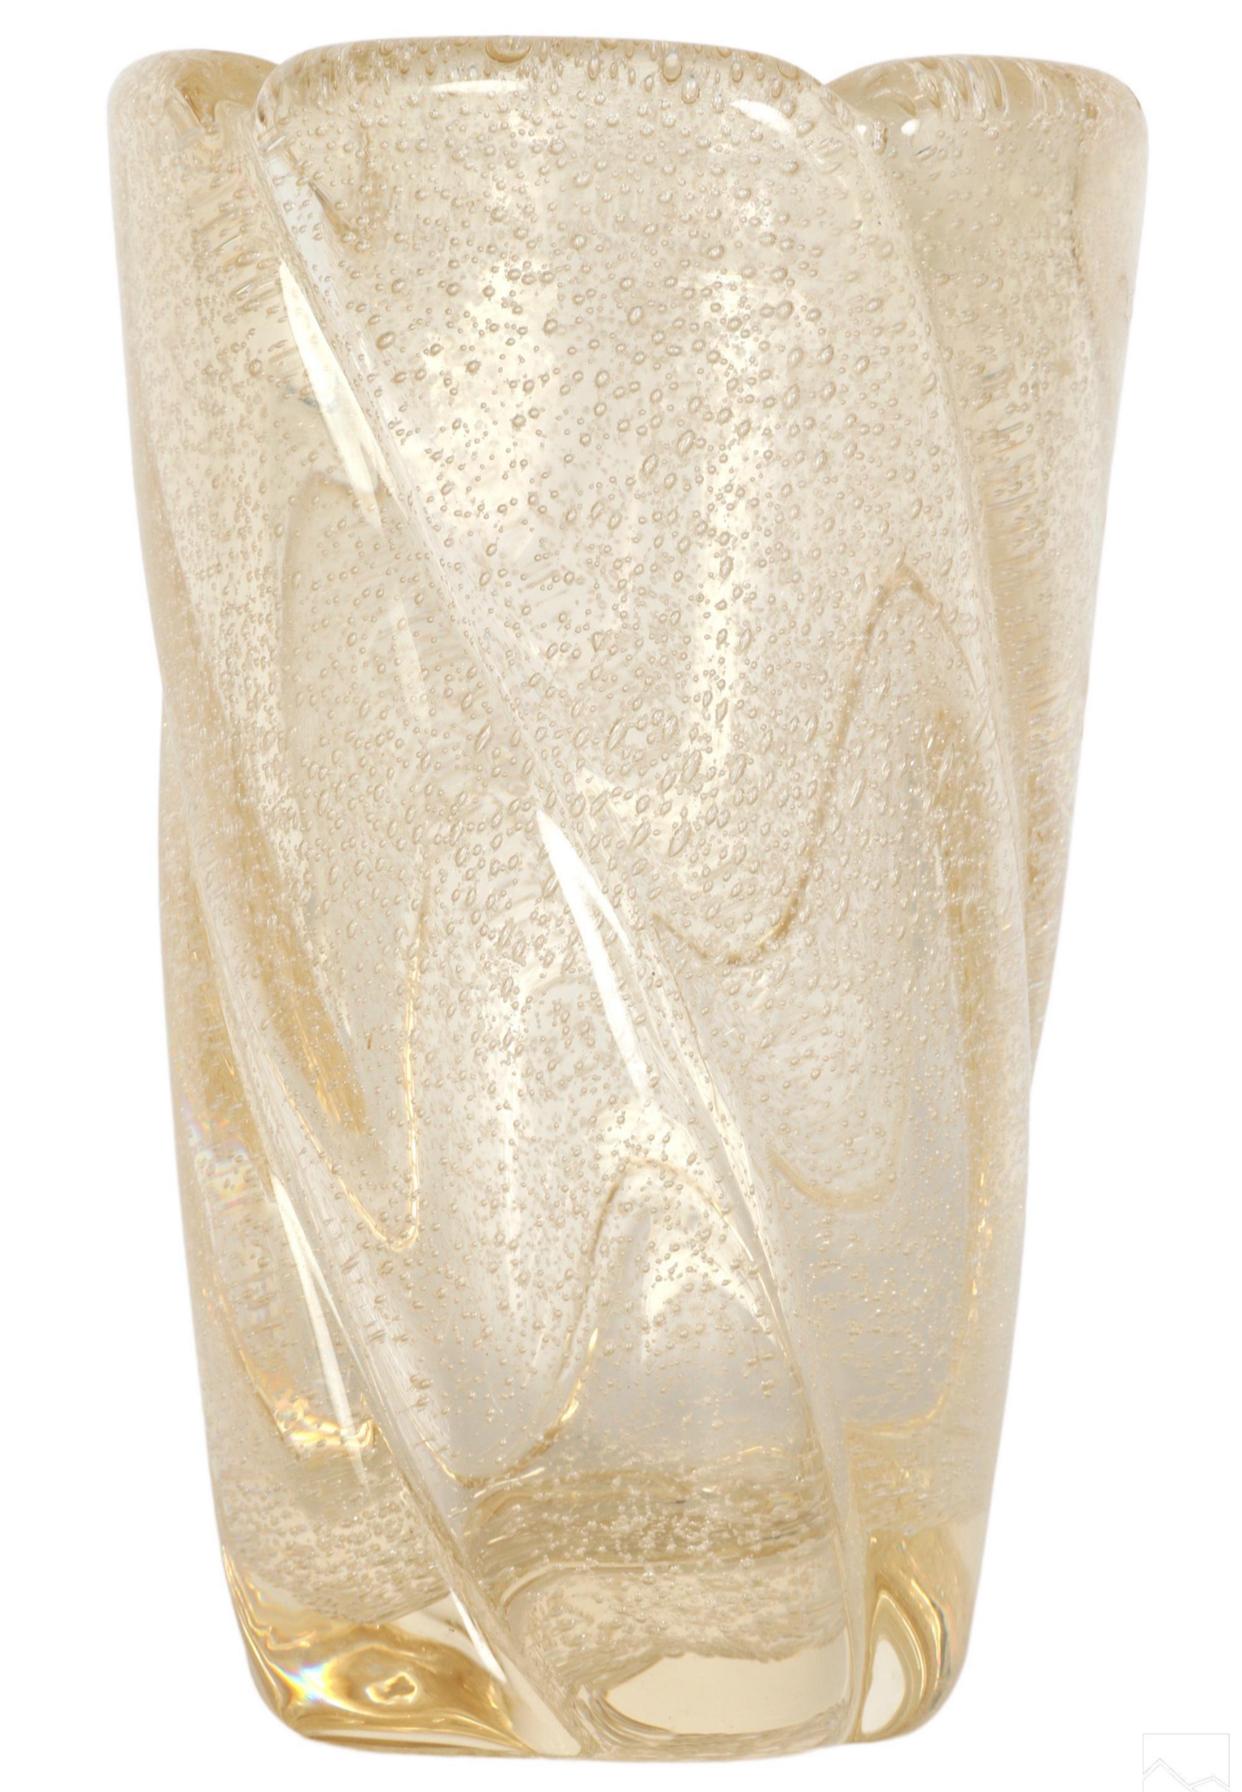 A fine Daum French crystal vase. Gold ribbed body with swirling design and interior controlled, captured, bubbles. Signed DAUM NANCY FRANCE at bottom rim. 
Dimensions: 10 X 6 X 6 in. 

Daum’s vases of the Art Deco period, unlike their earlier glass,